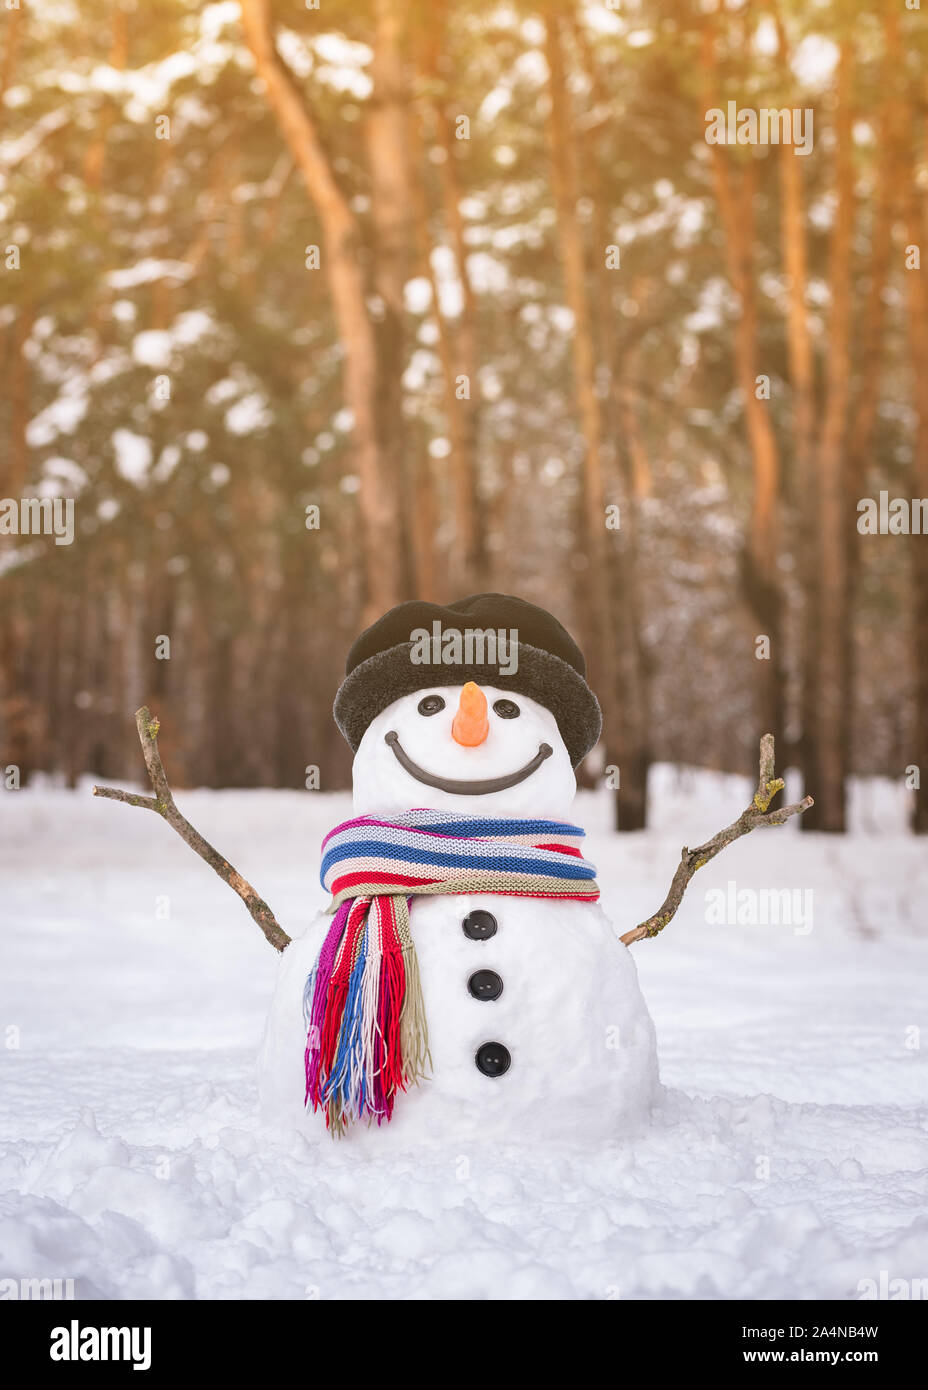 Snowman in a snowy city park. Traditional winter fun for children in nature Stock Photo